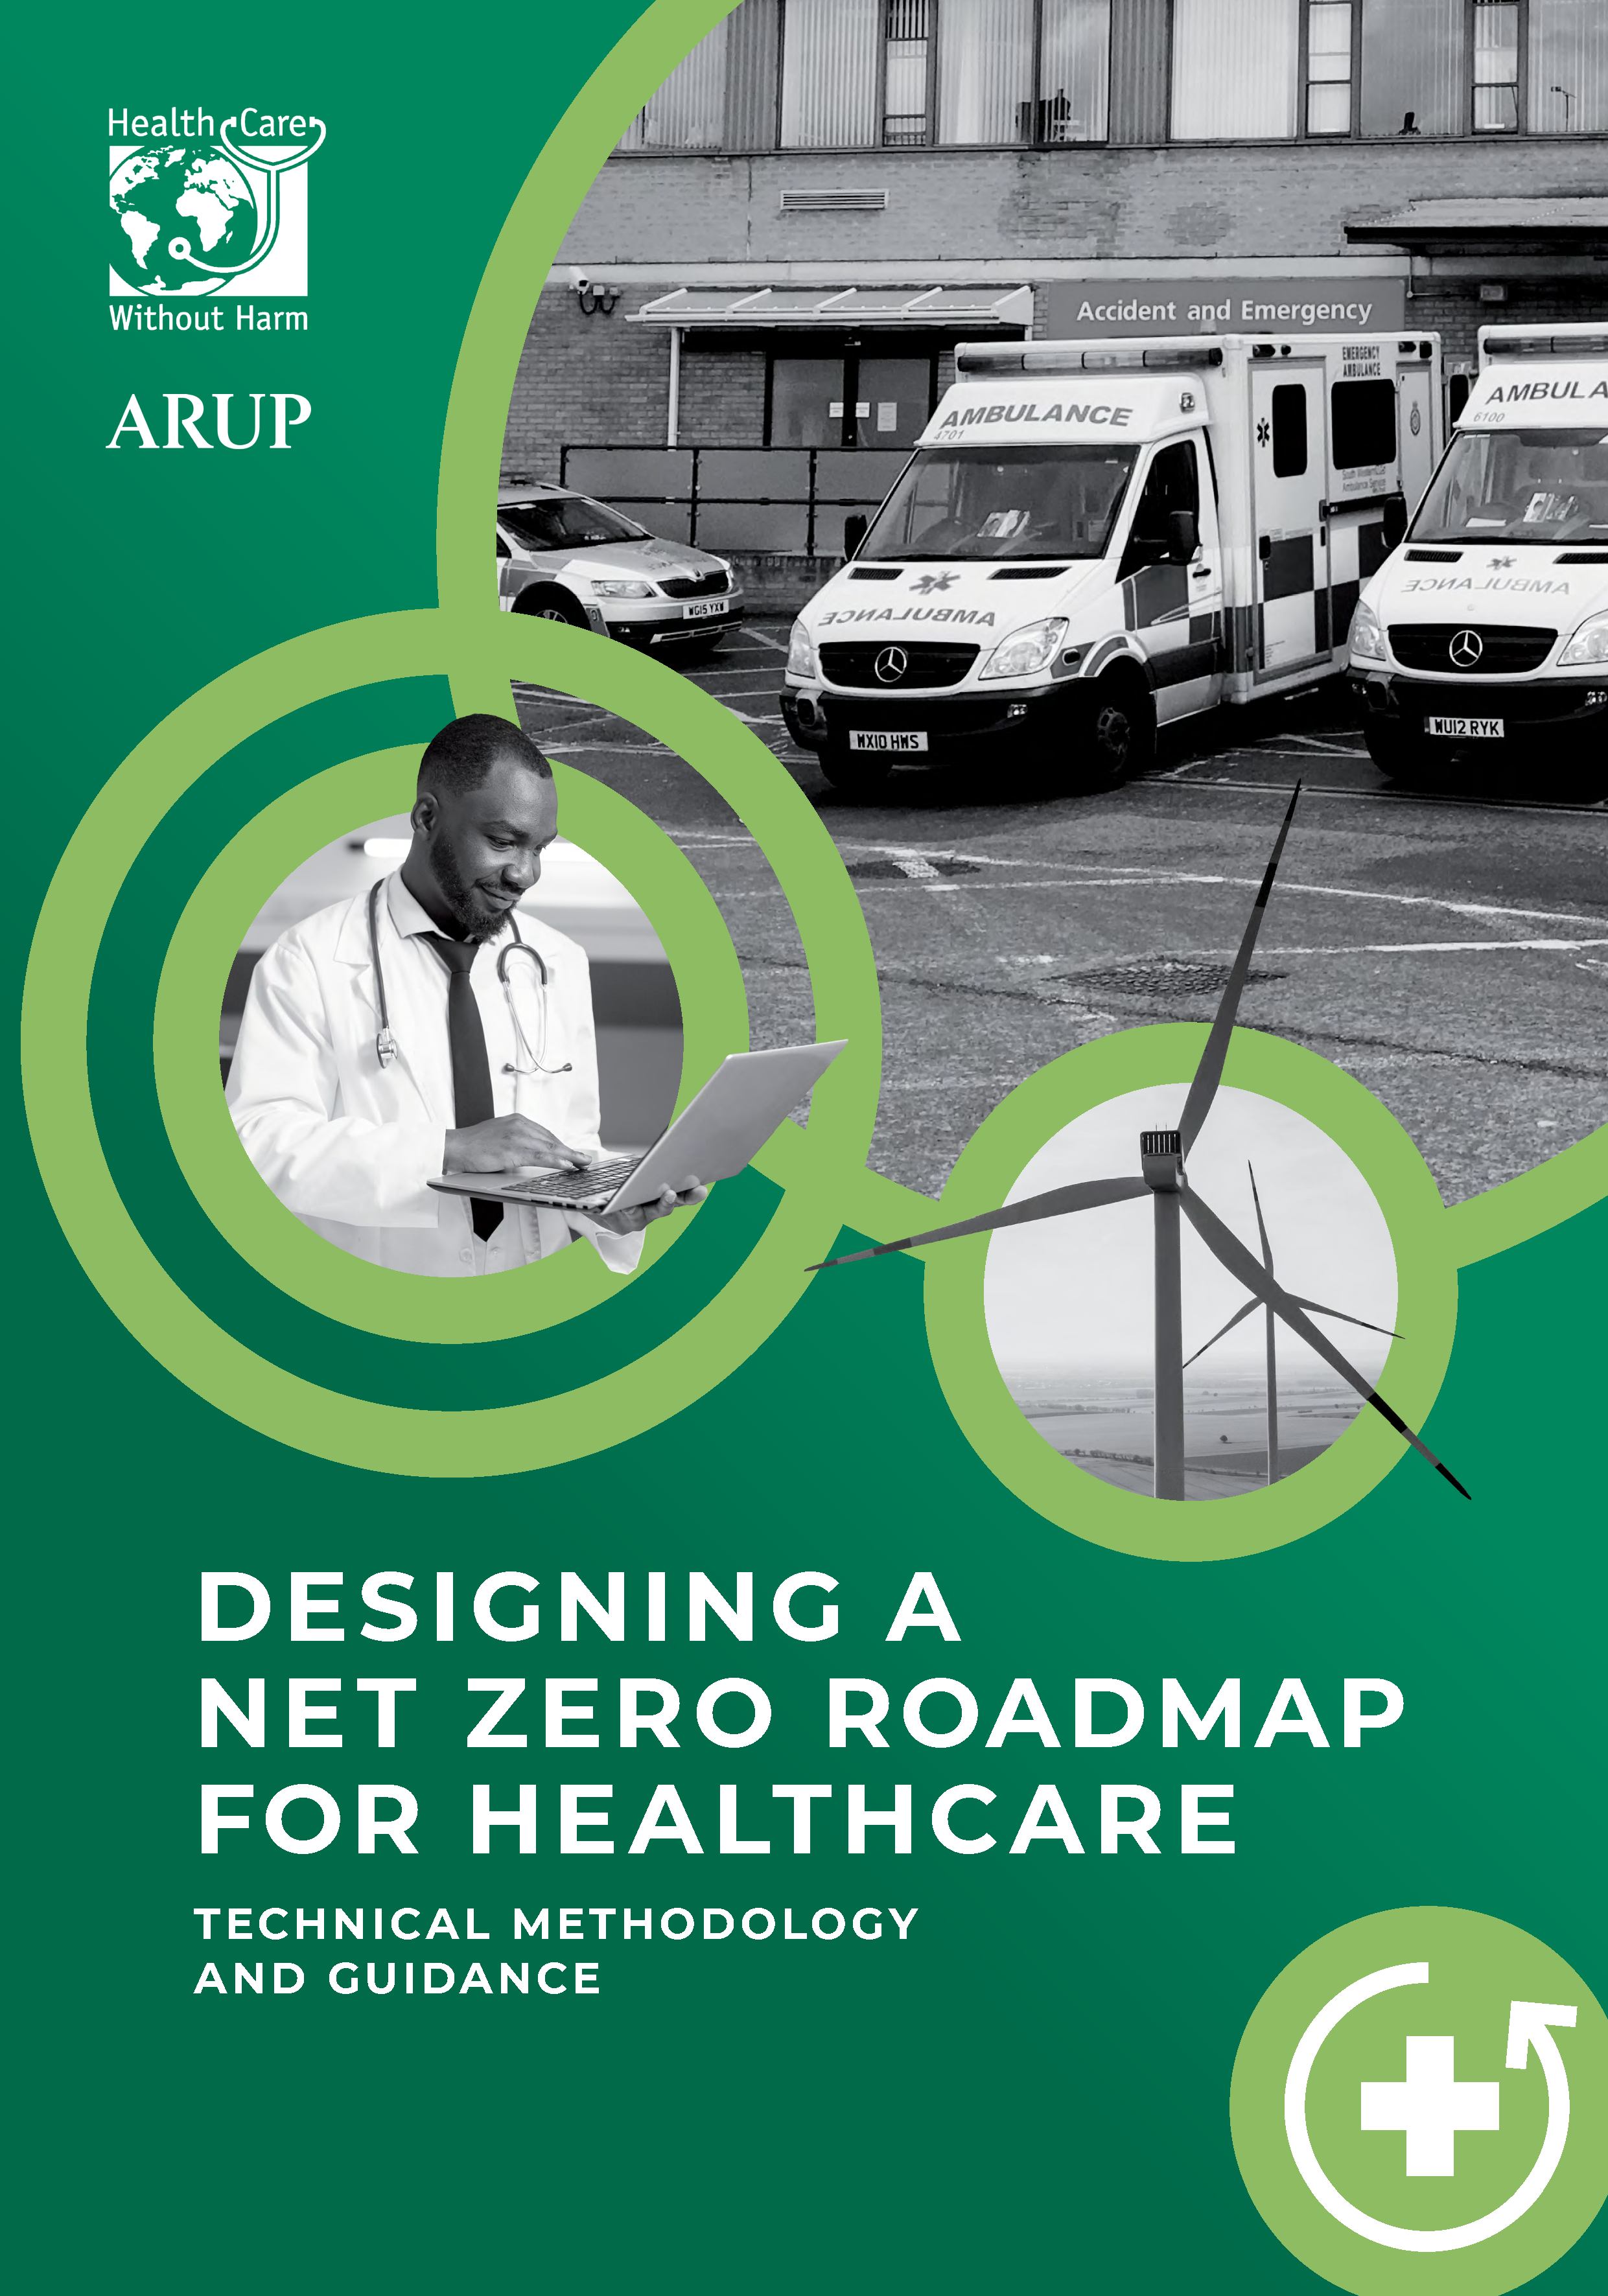 Cover of Designing a Net Zero Road Map for Healthcare publication